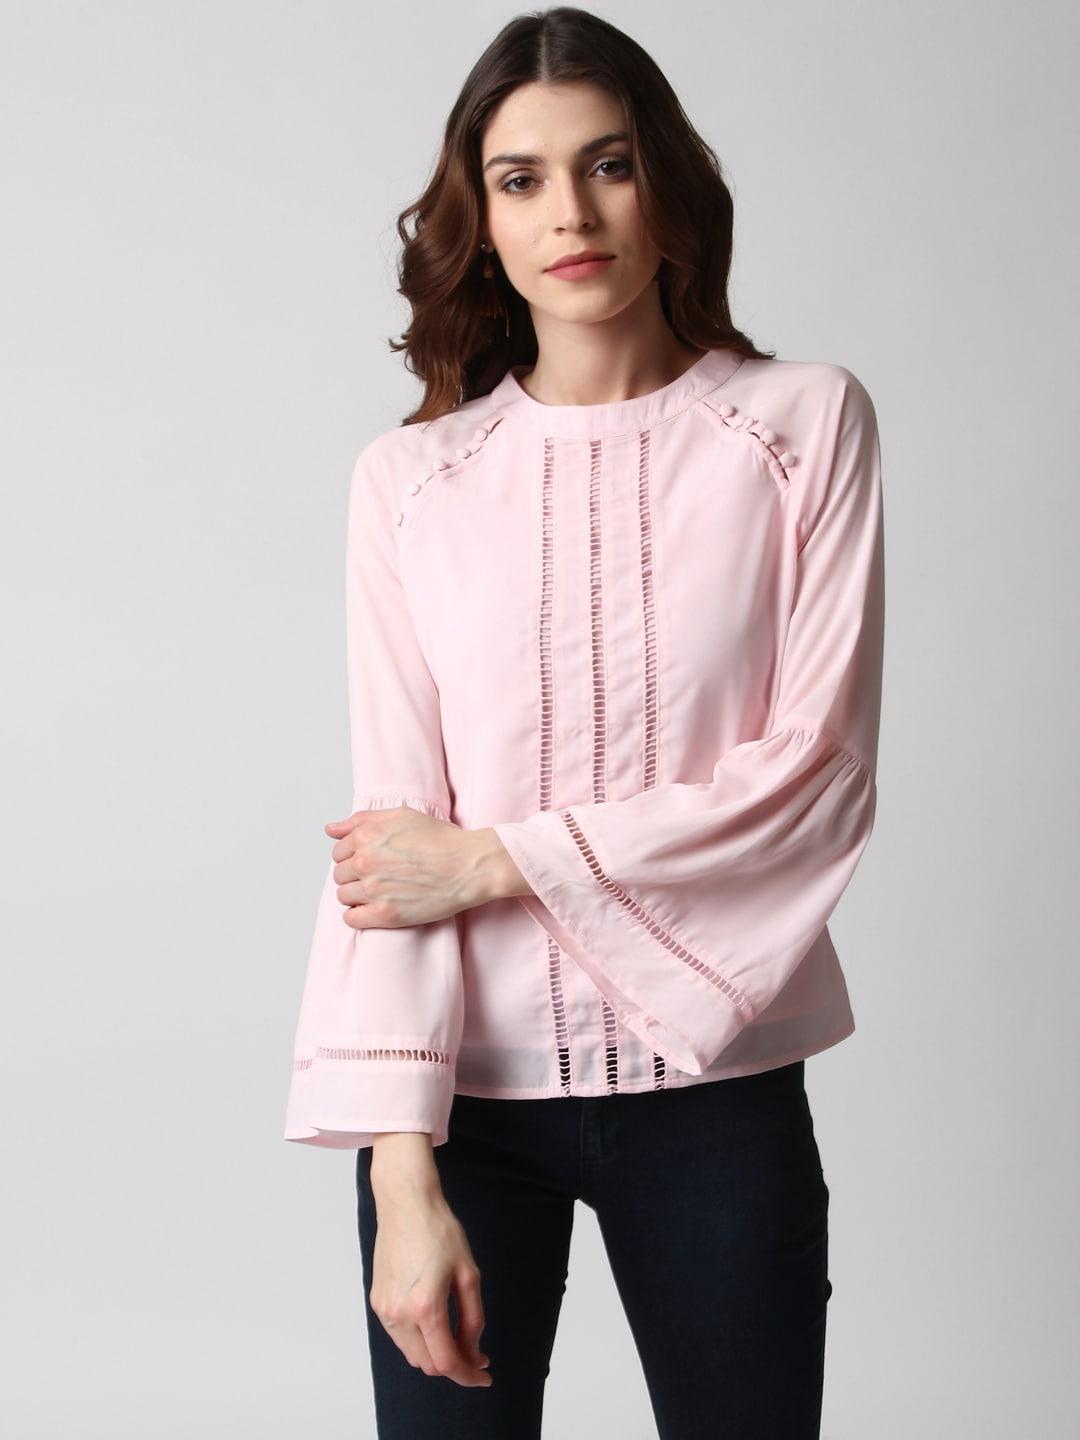 marie-claire-women-pink-solid-top